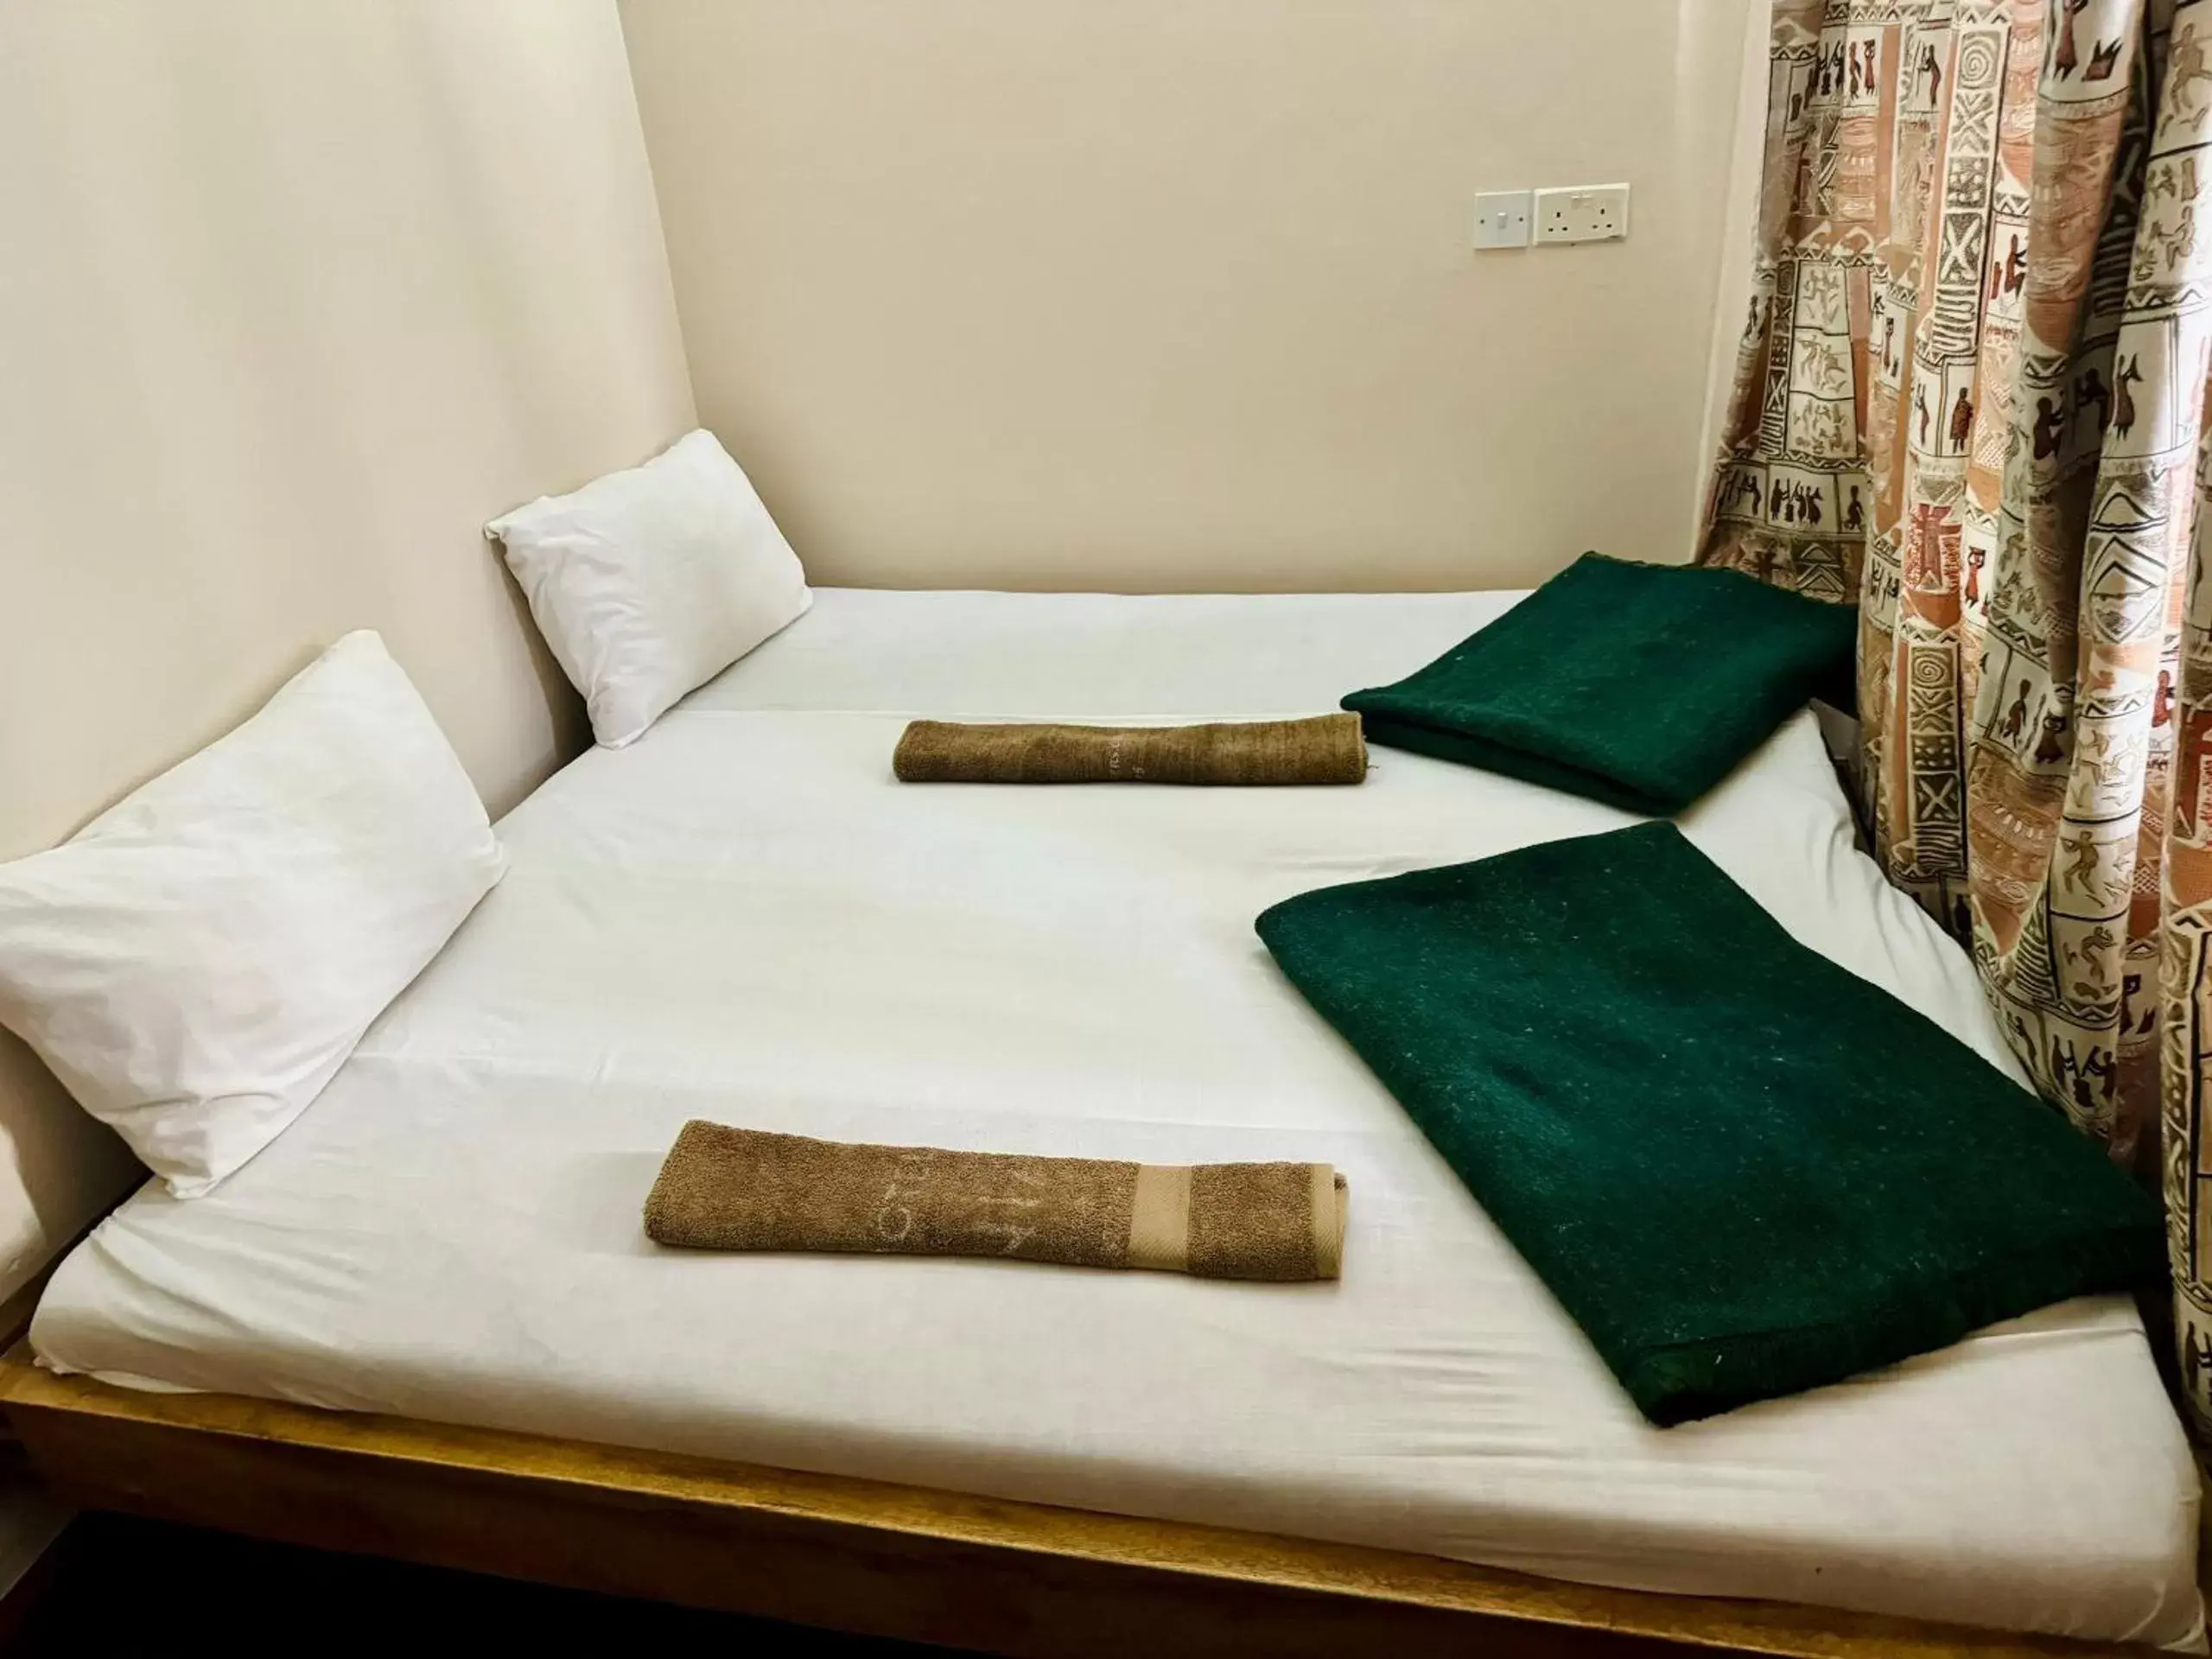 Bed in Arusha Backpackers Hotel